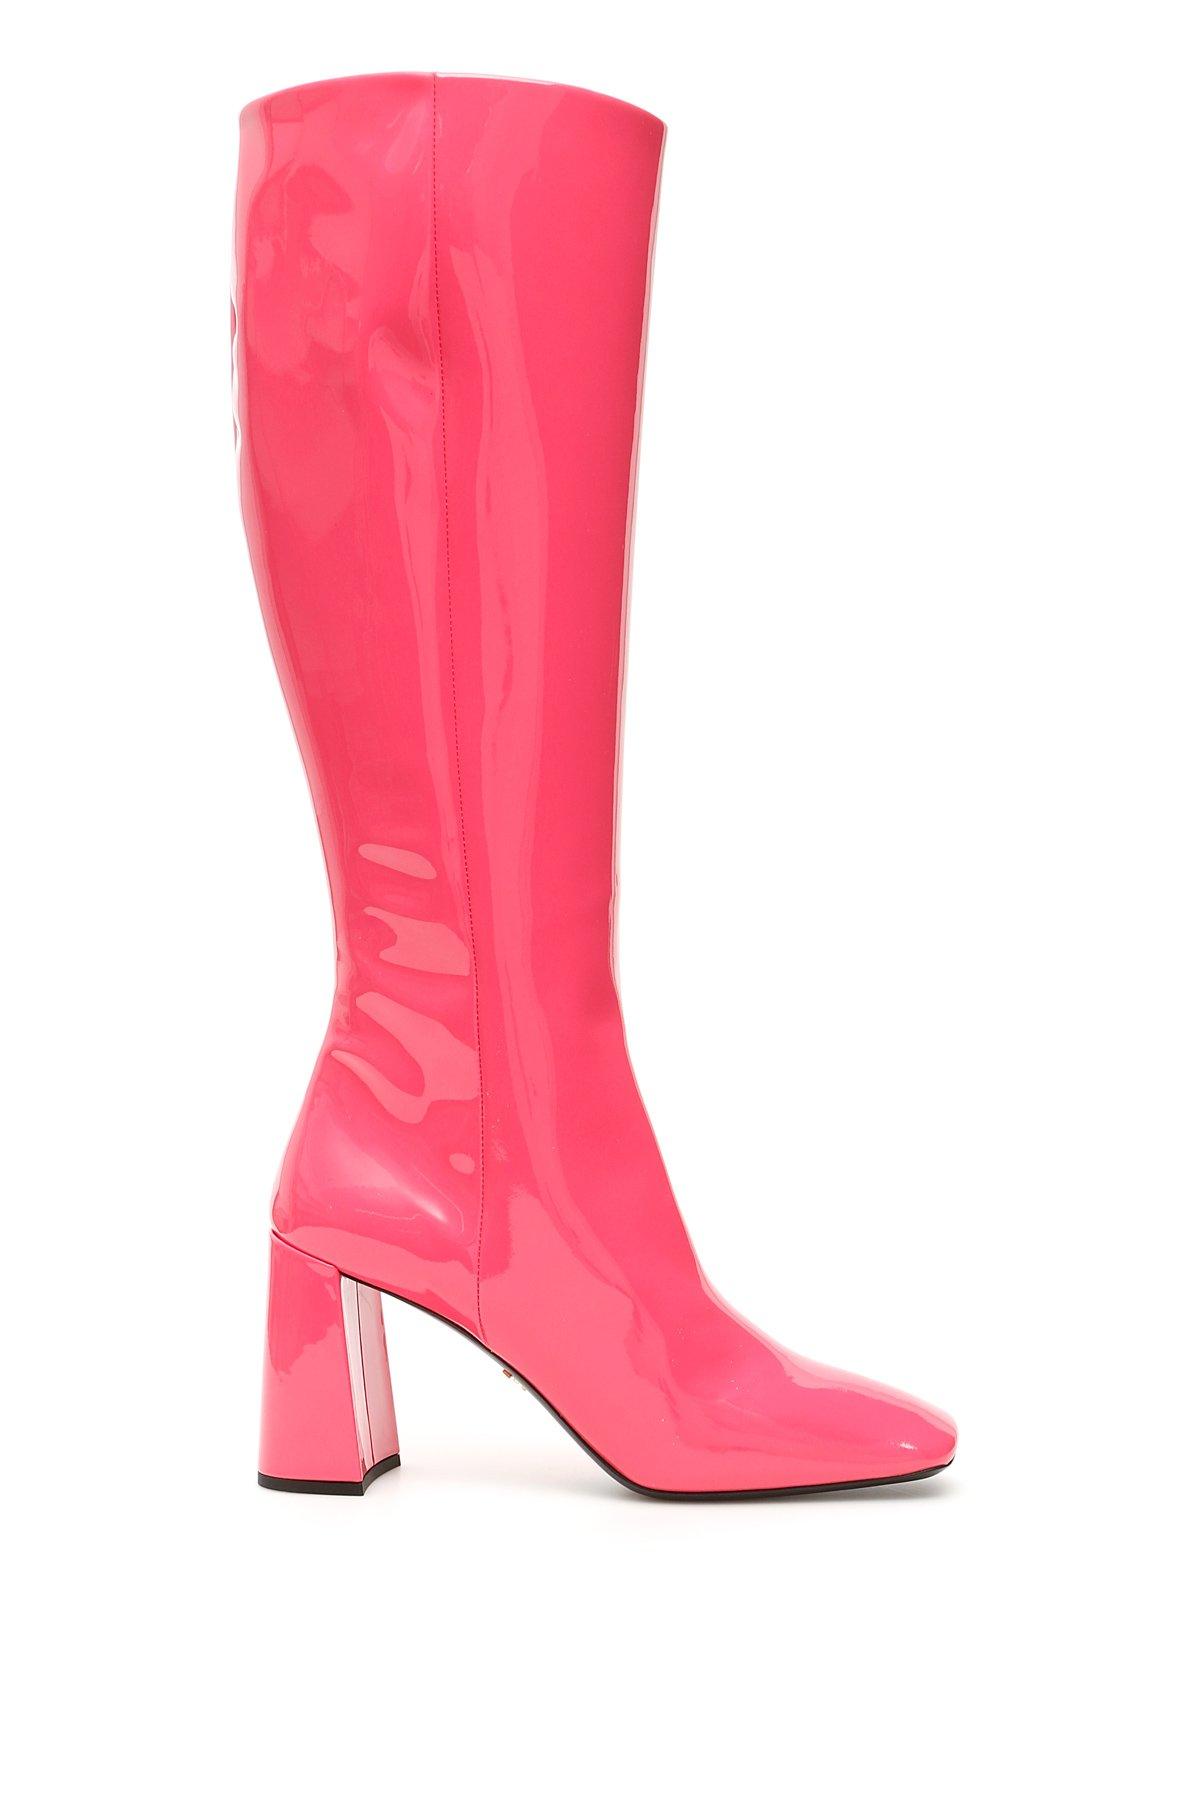 Prada Leather Knee High Boots in Pink,Fuchsia (Pink) | Lyst